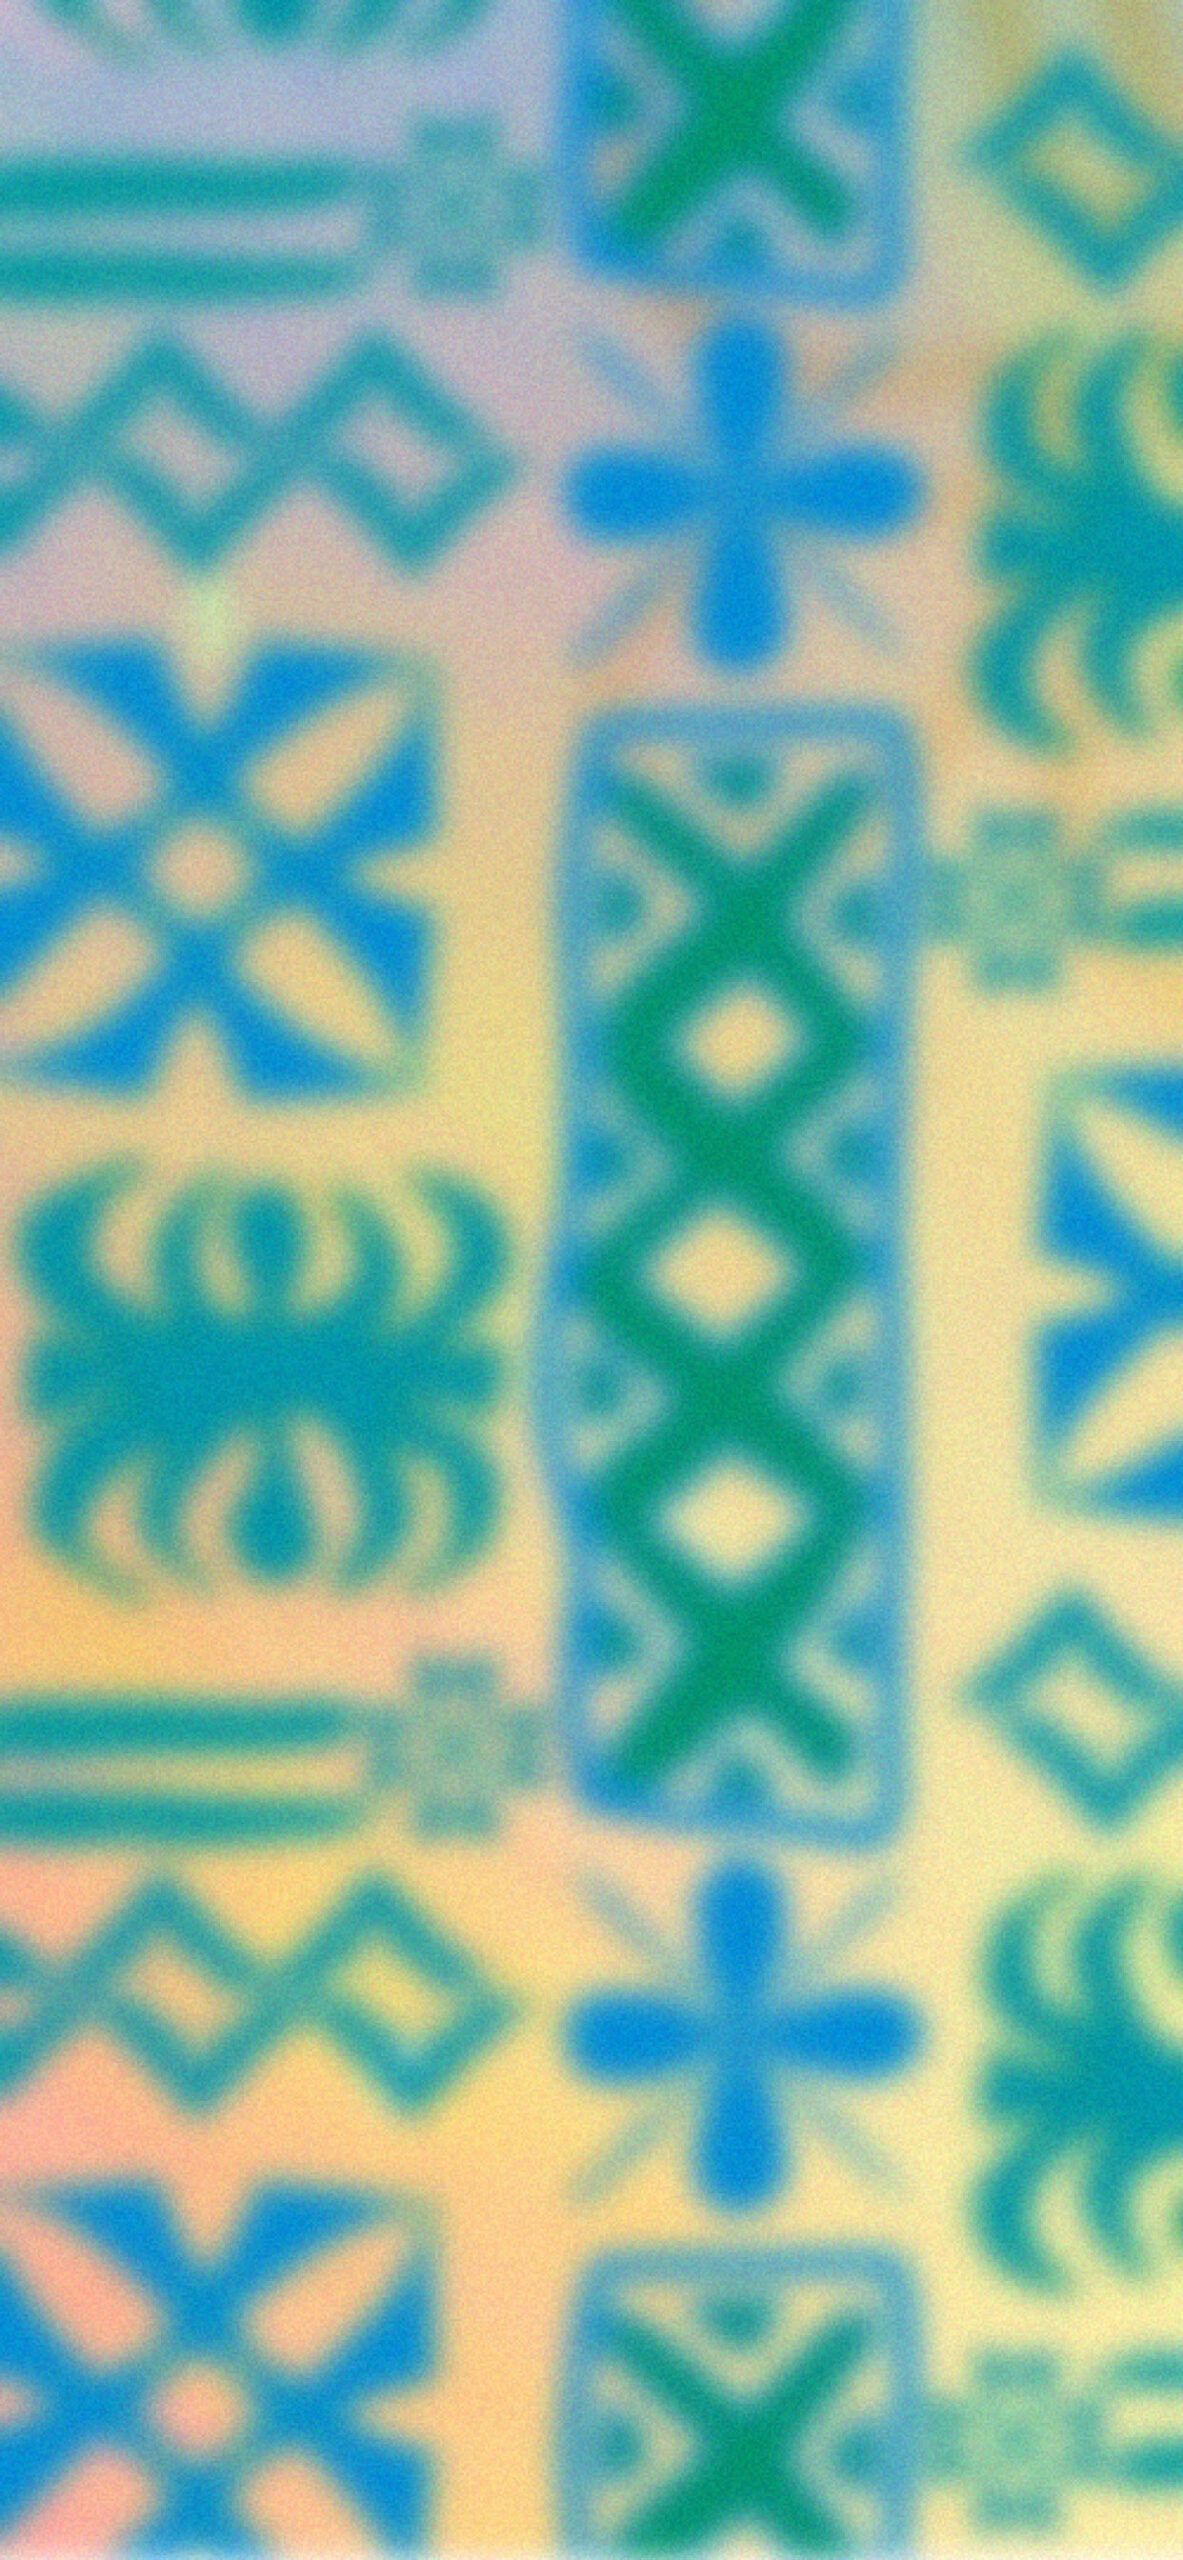 A blurry image of crosses on a yellow and blue background. - SpongeBob